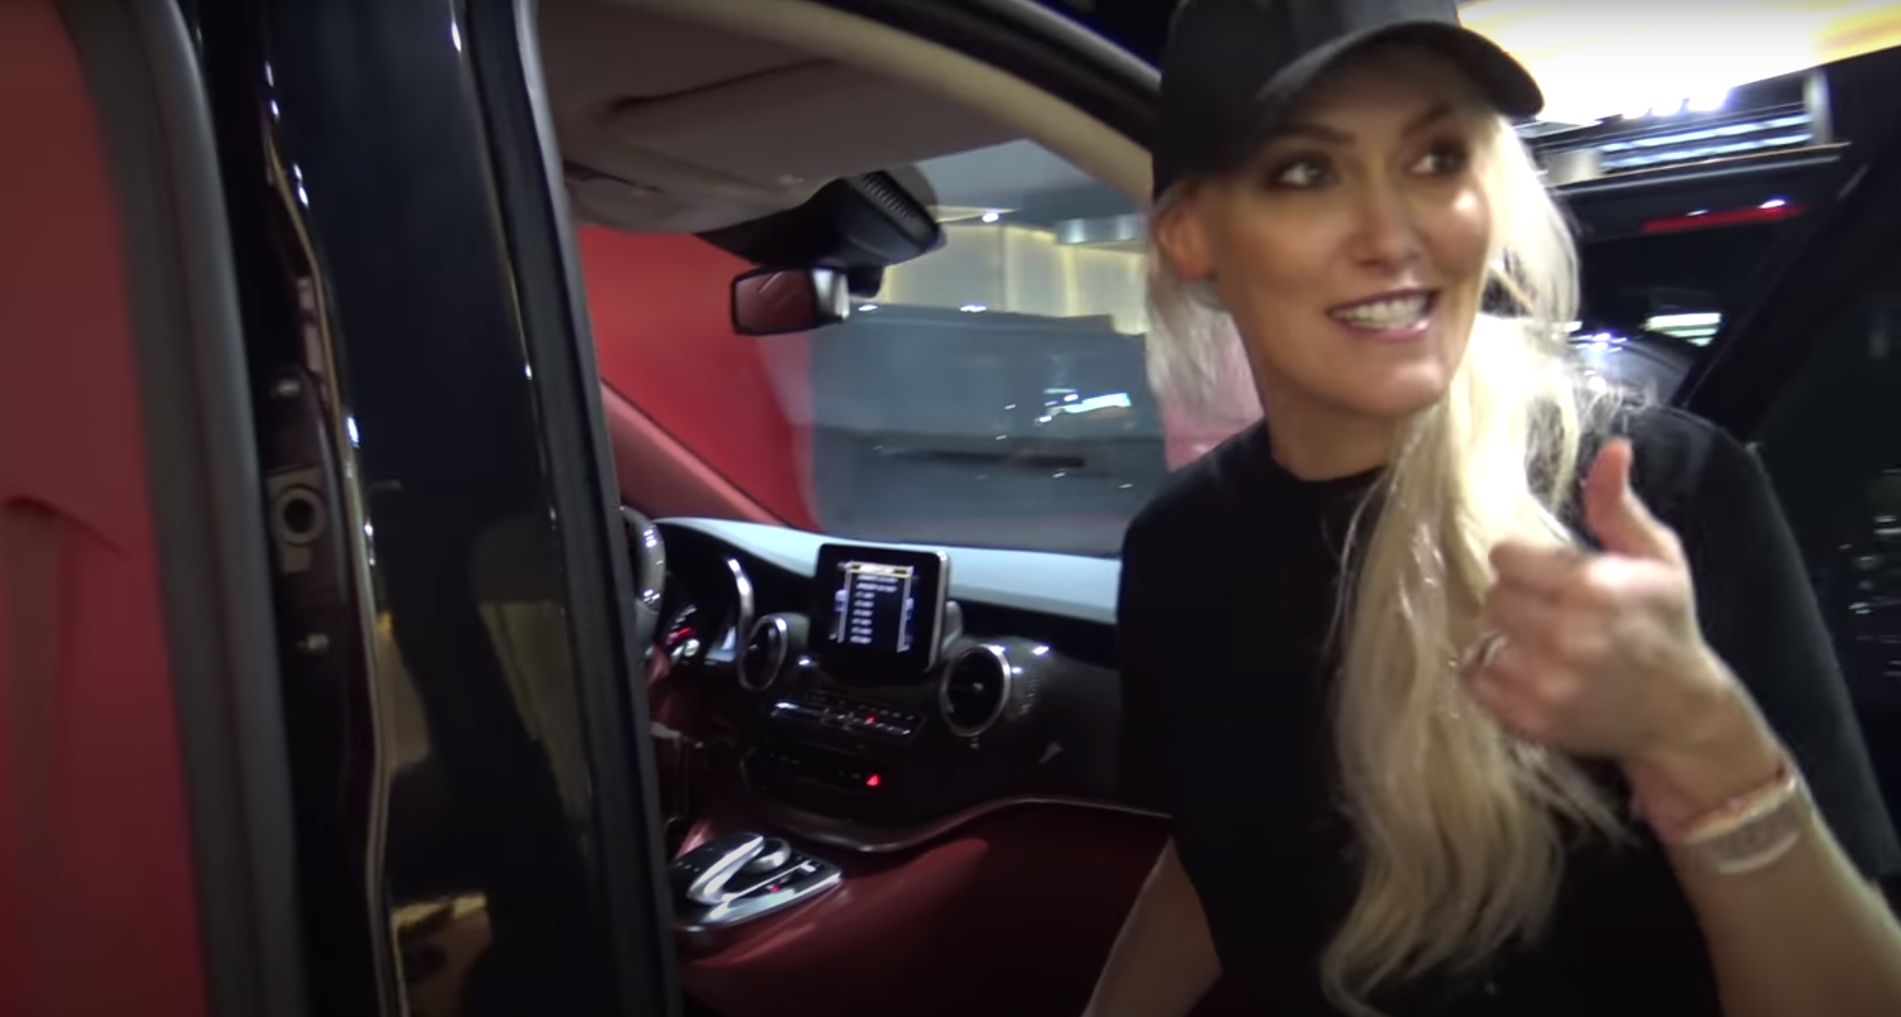 Supercar Blondie poses outside a Mercedes V-class van